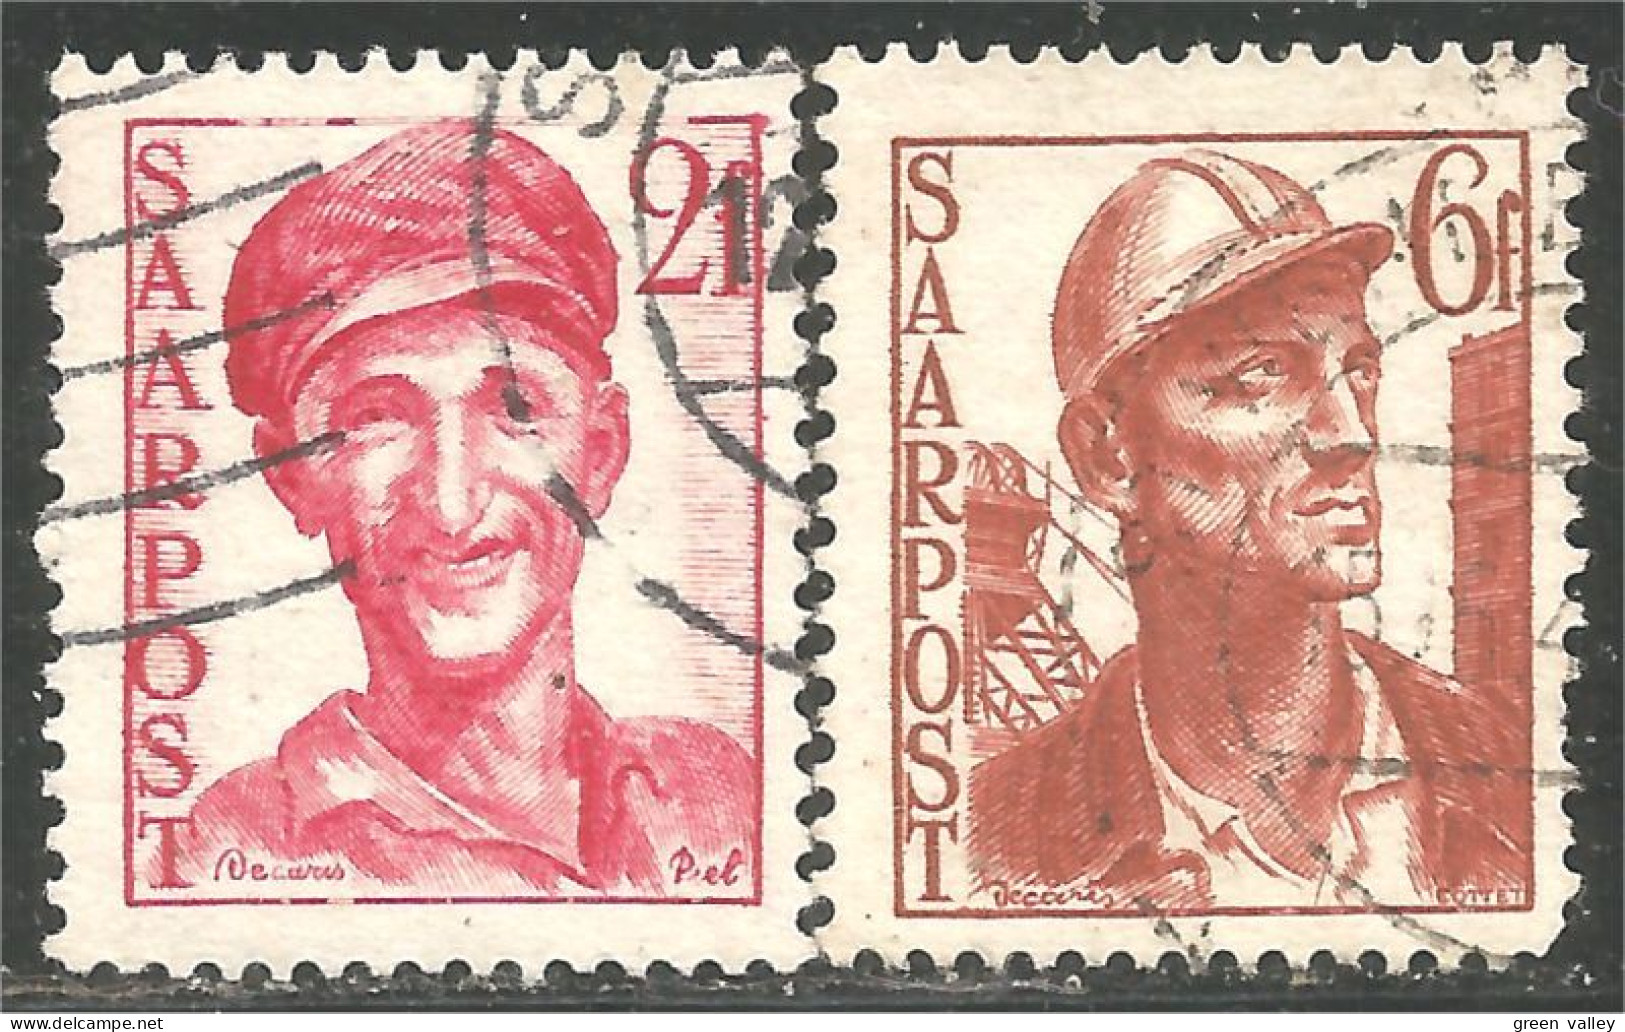 779 Sarre 1948 Ouvrier Worker Miner Mines Mining Charbon Coal (SAA-84b) - Usados